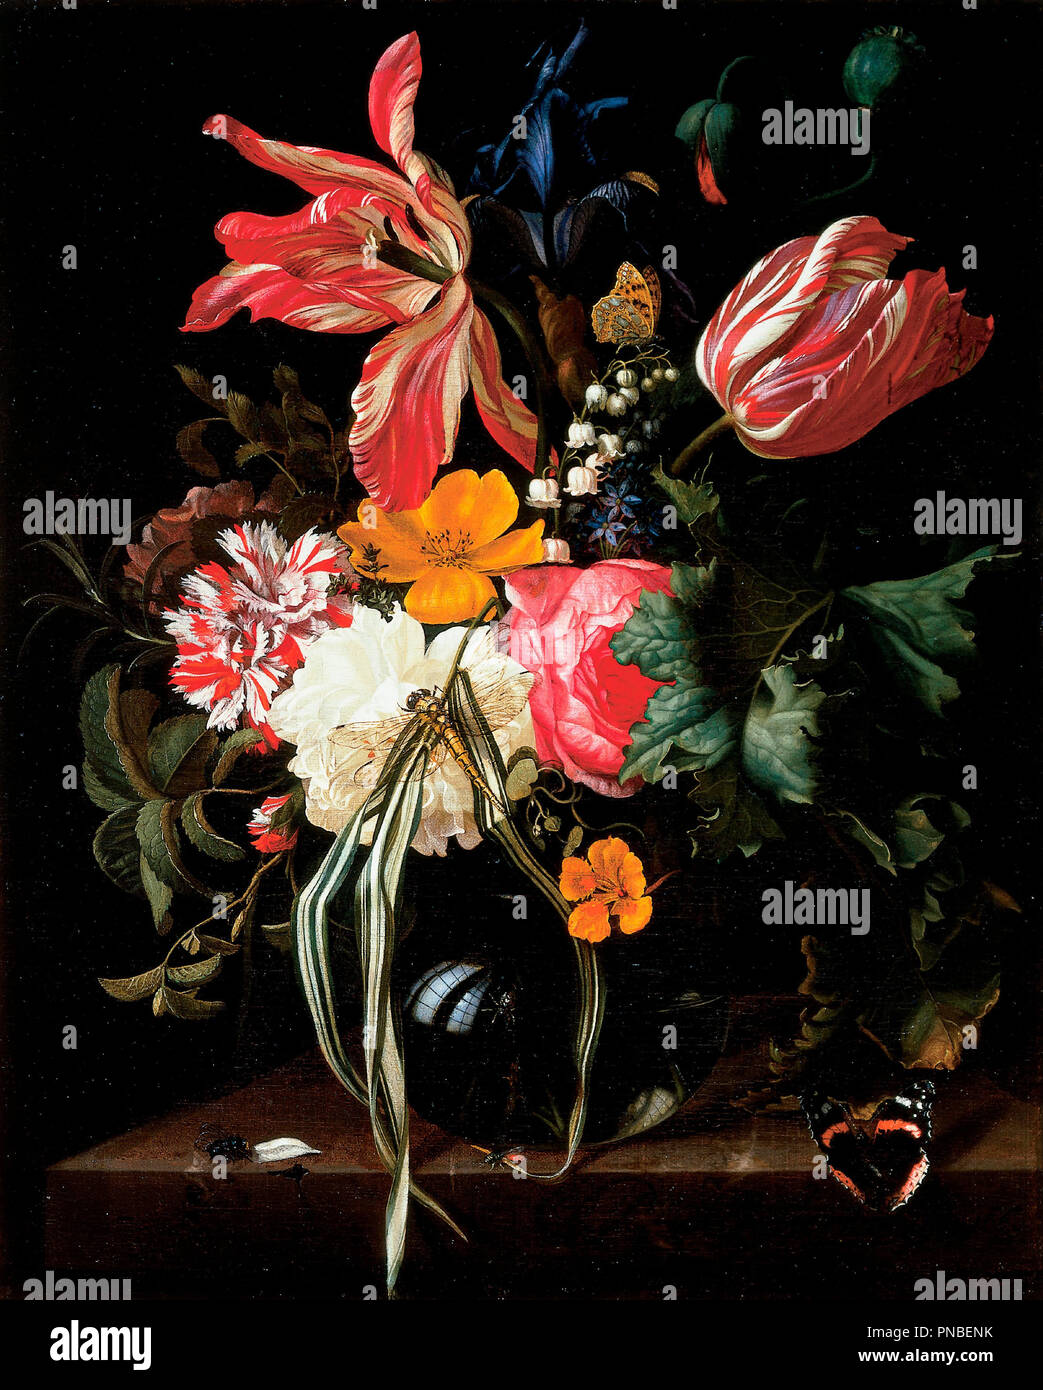 Flower Still Life. Date/Period: 1669-01-01/1669-12-31. Painting. Oil on canvas. Width: 37.1 cm. Height: 46 cm. Author: Maria van Oosterwijck. Stock Photo